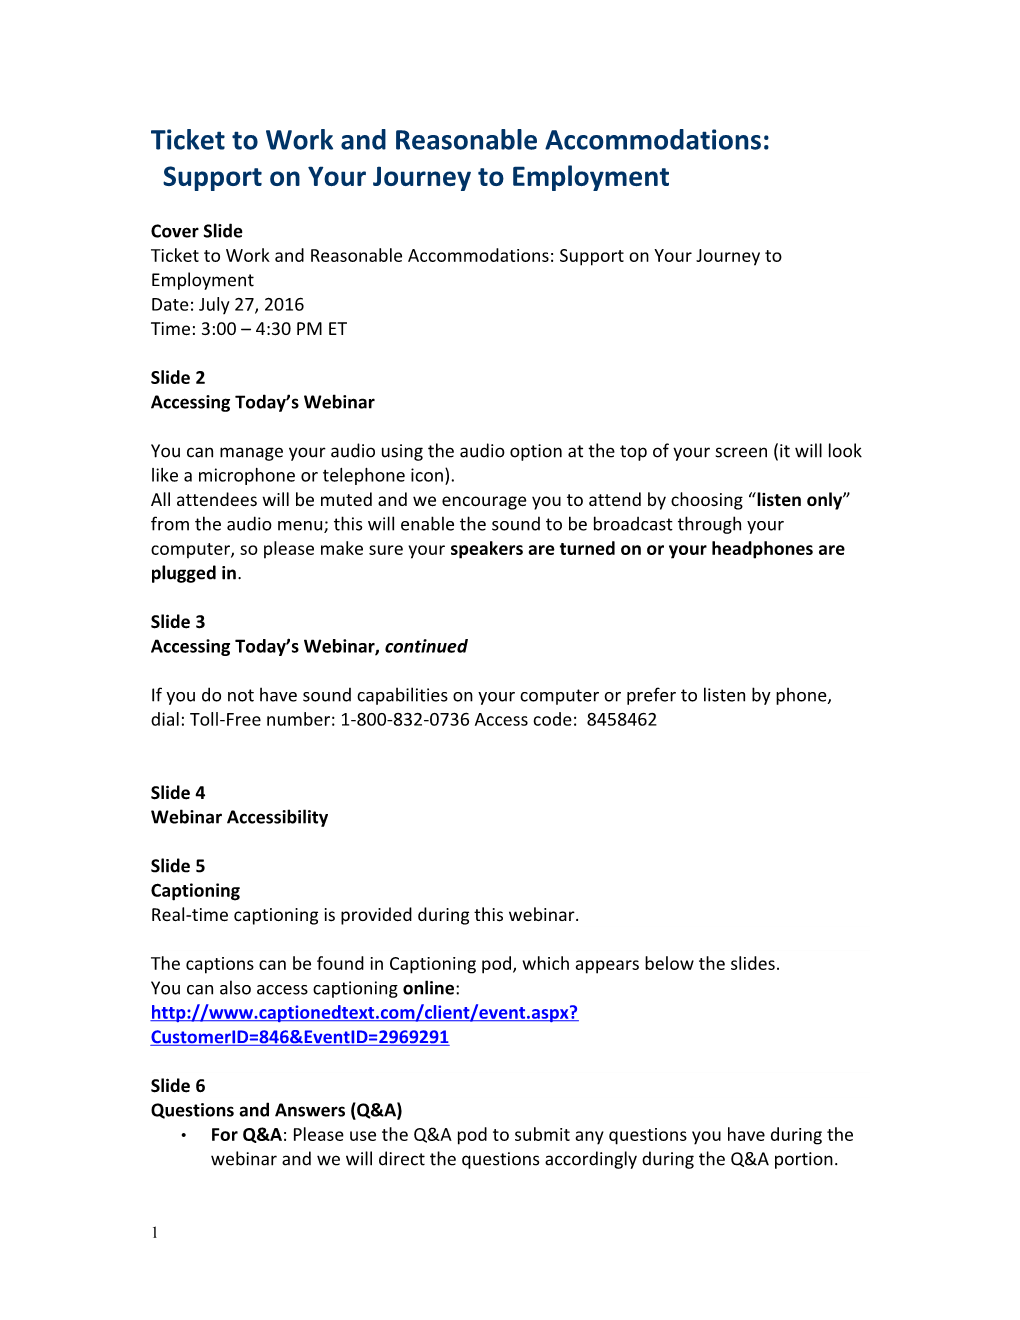 Ticket to Work and Reasonable Accommodations: Support on Your Journey to Employment